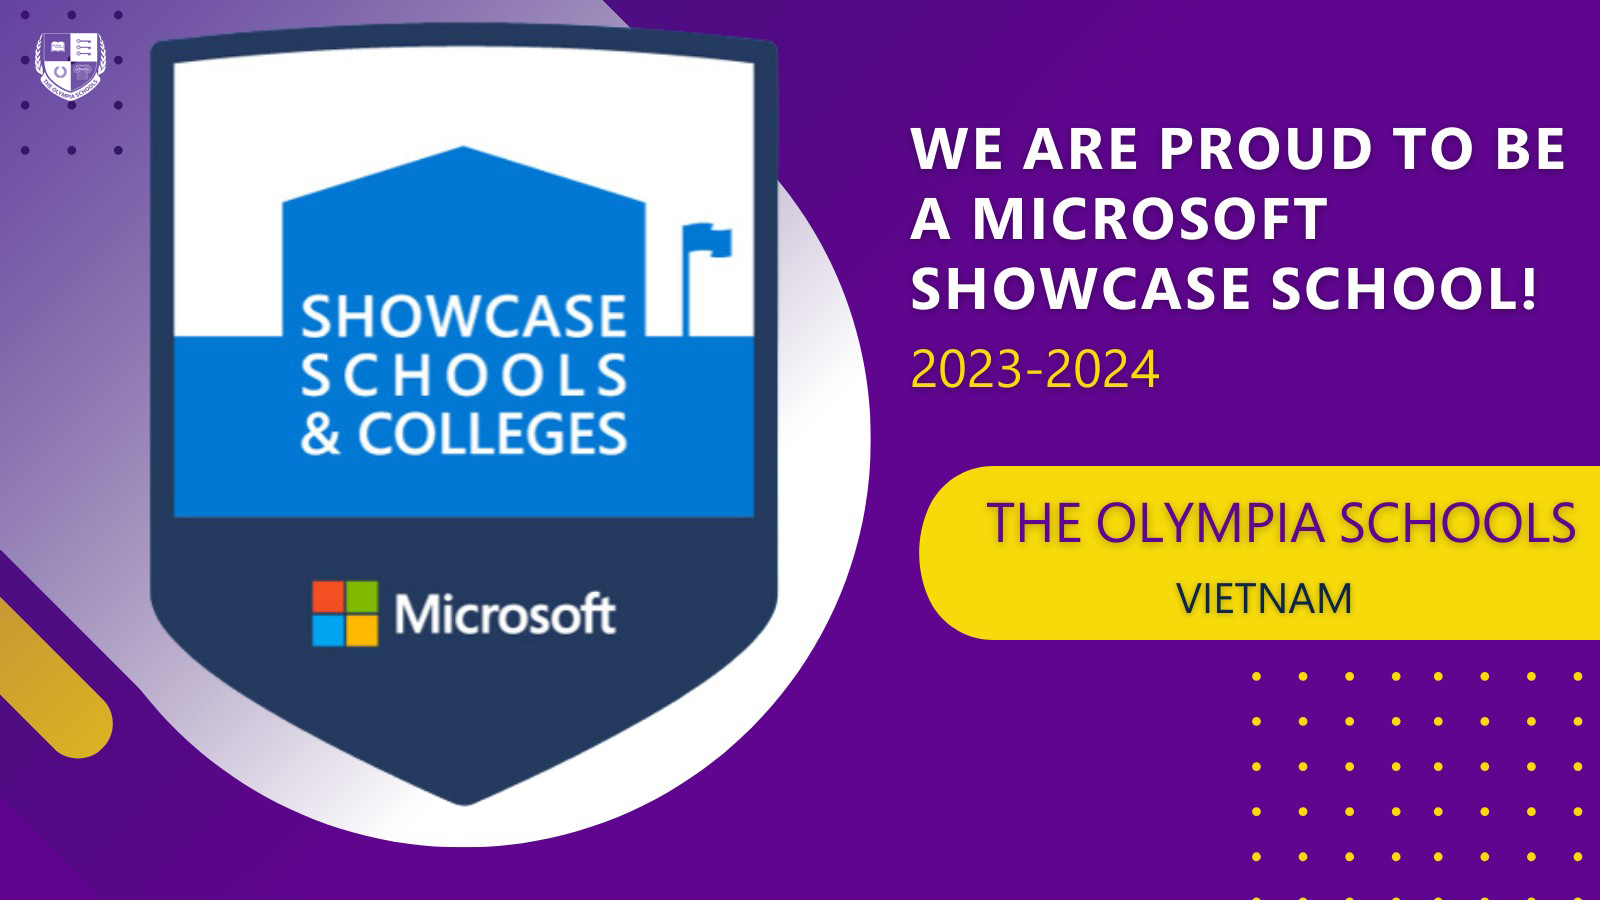 May be a graphic of text that says "WE ARE PROUD ΤΟ BE A MICROSOFT SHOWCASE SCHOOL! 2023-2024 SHOWCASE SCHOOLS & COLLEGES Microsoft THE OLYMPIA SCHOOLS VIETNAM"